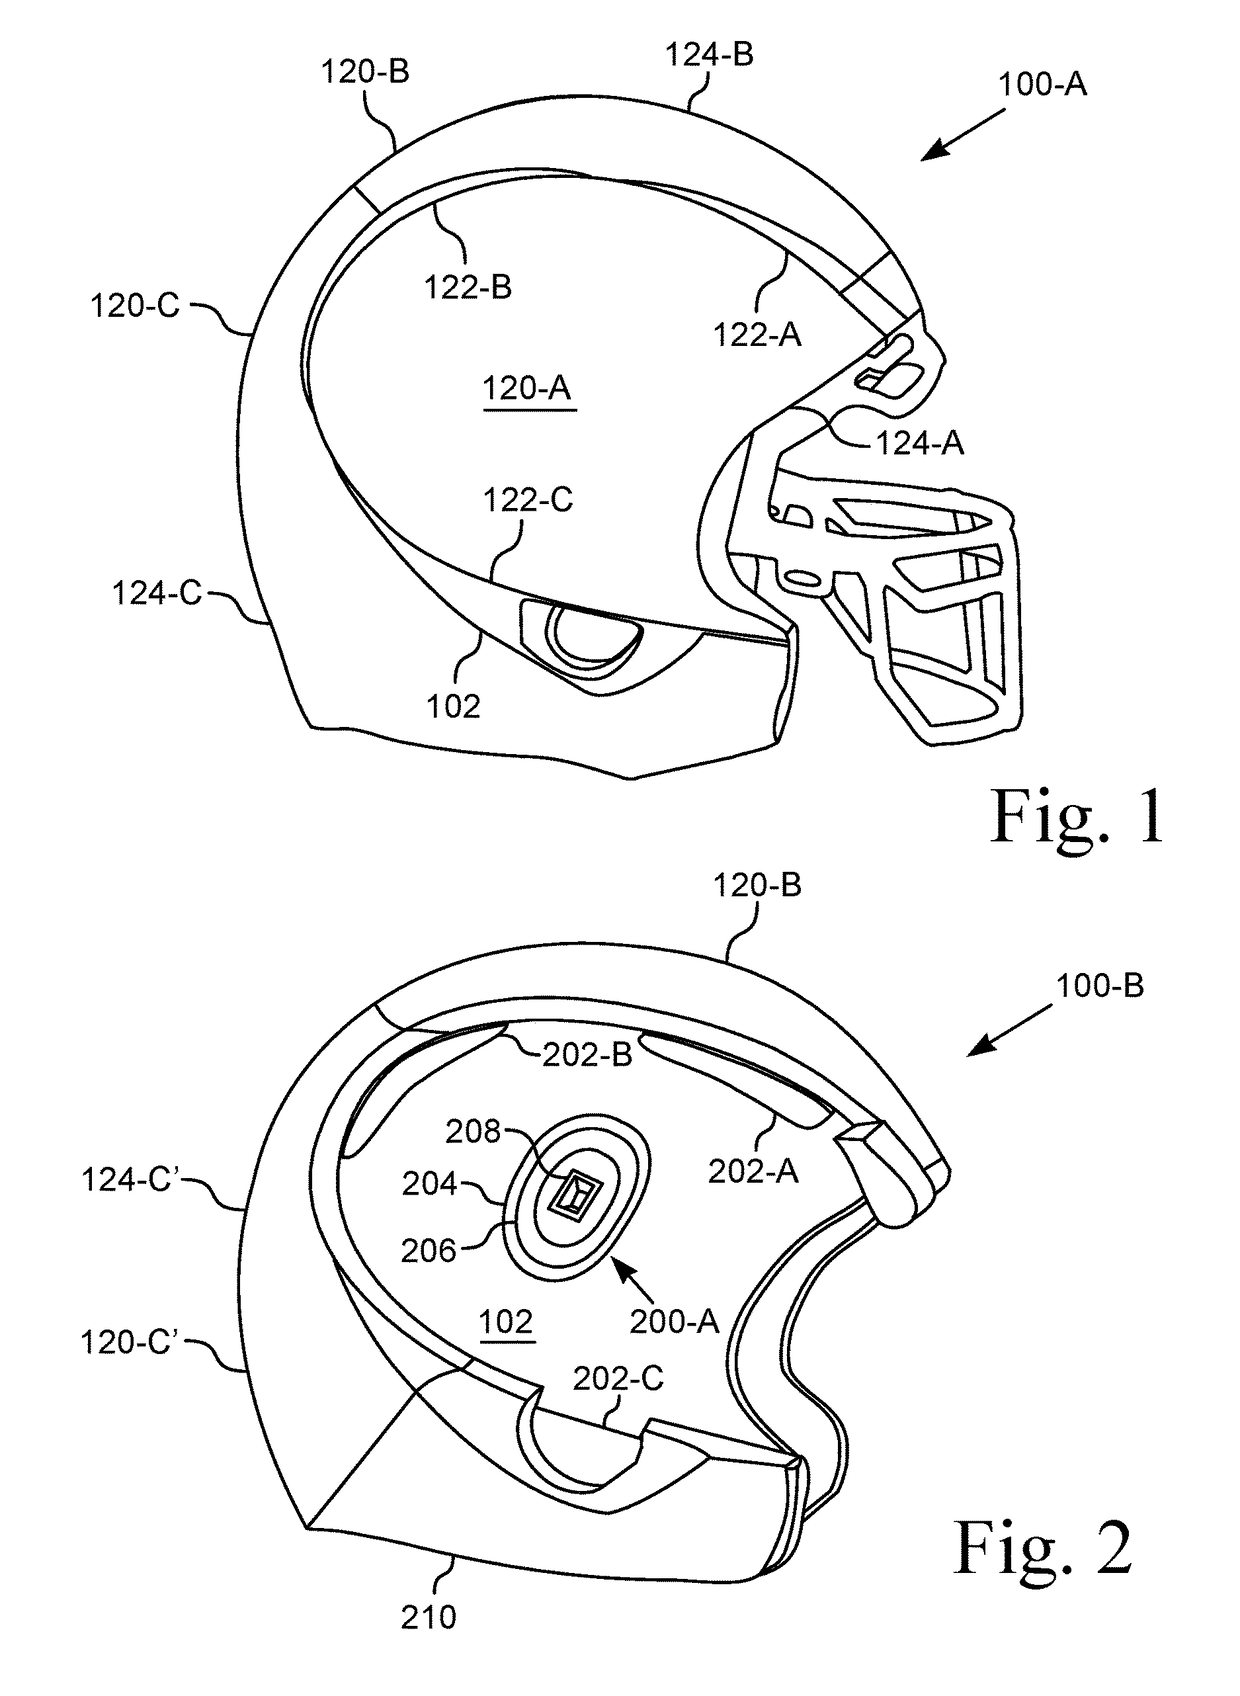 Protective Helmet for Lateral and Direct Impacts